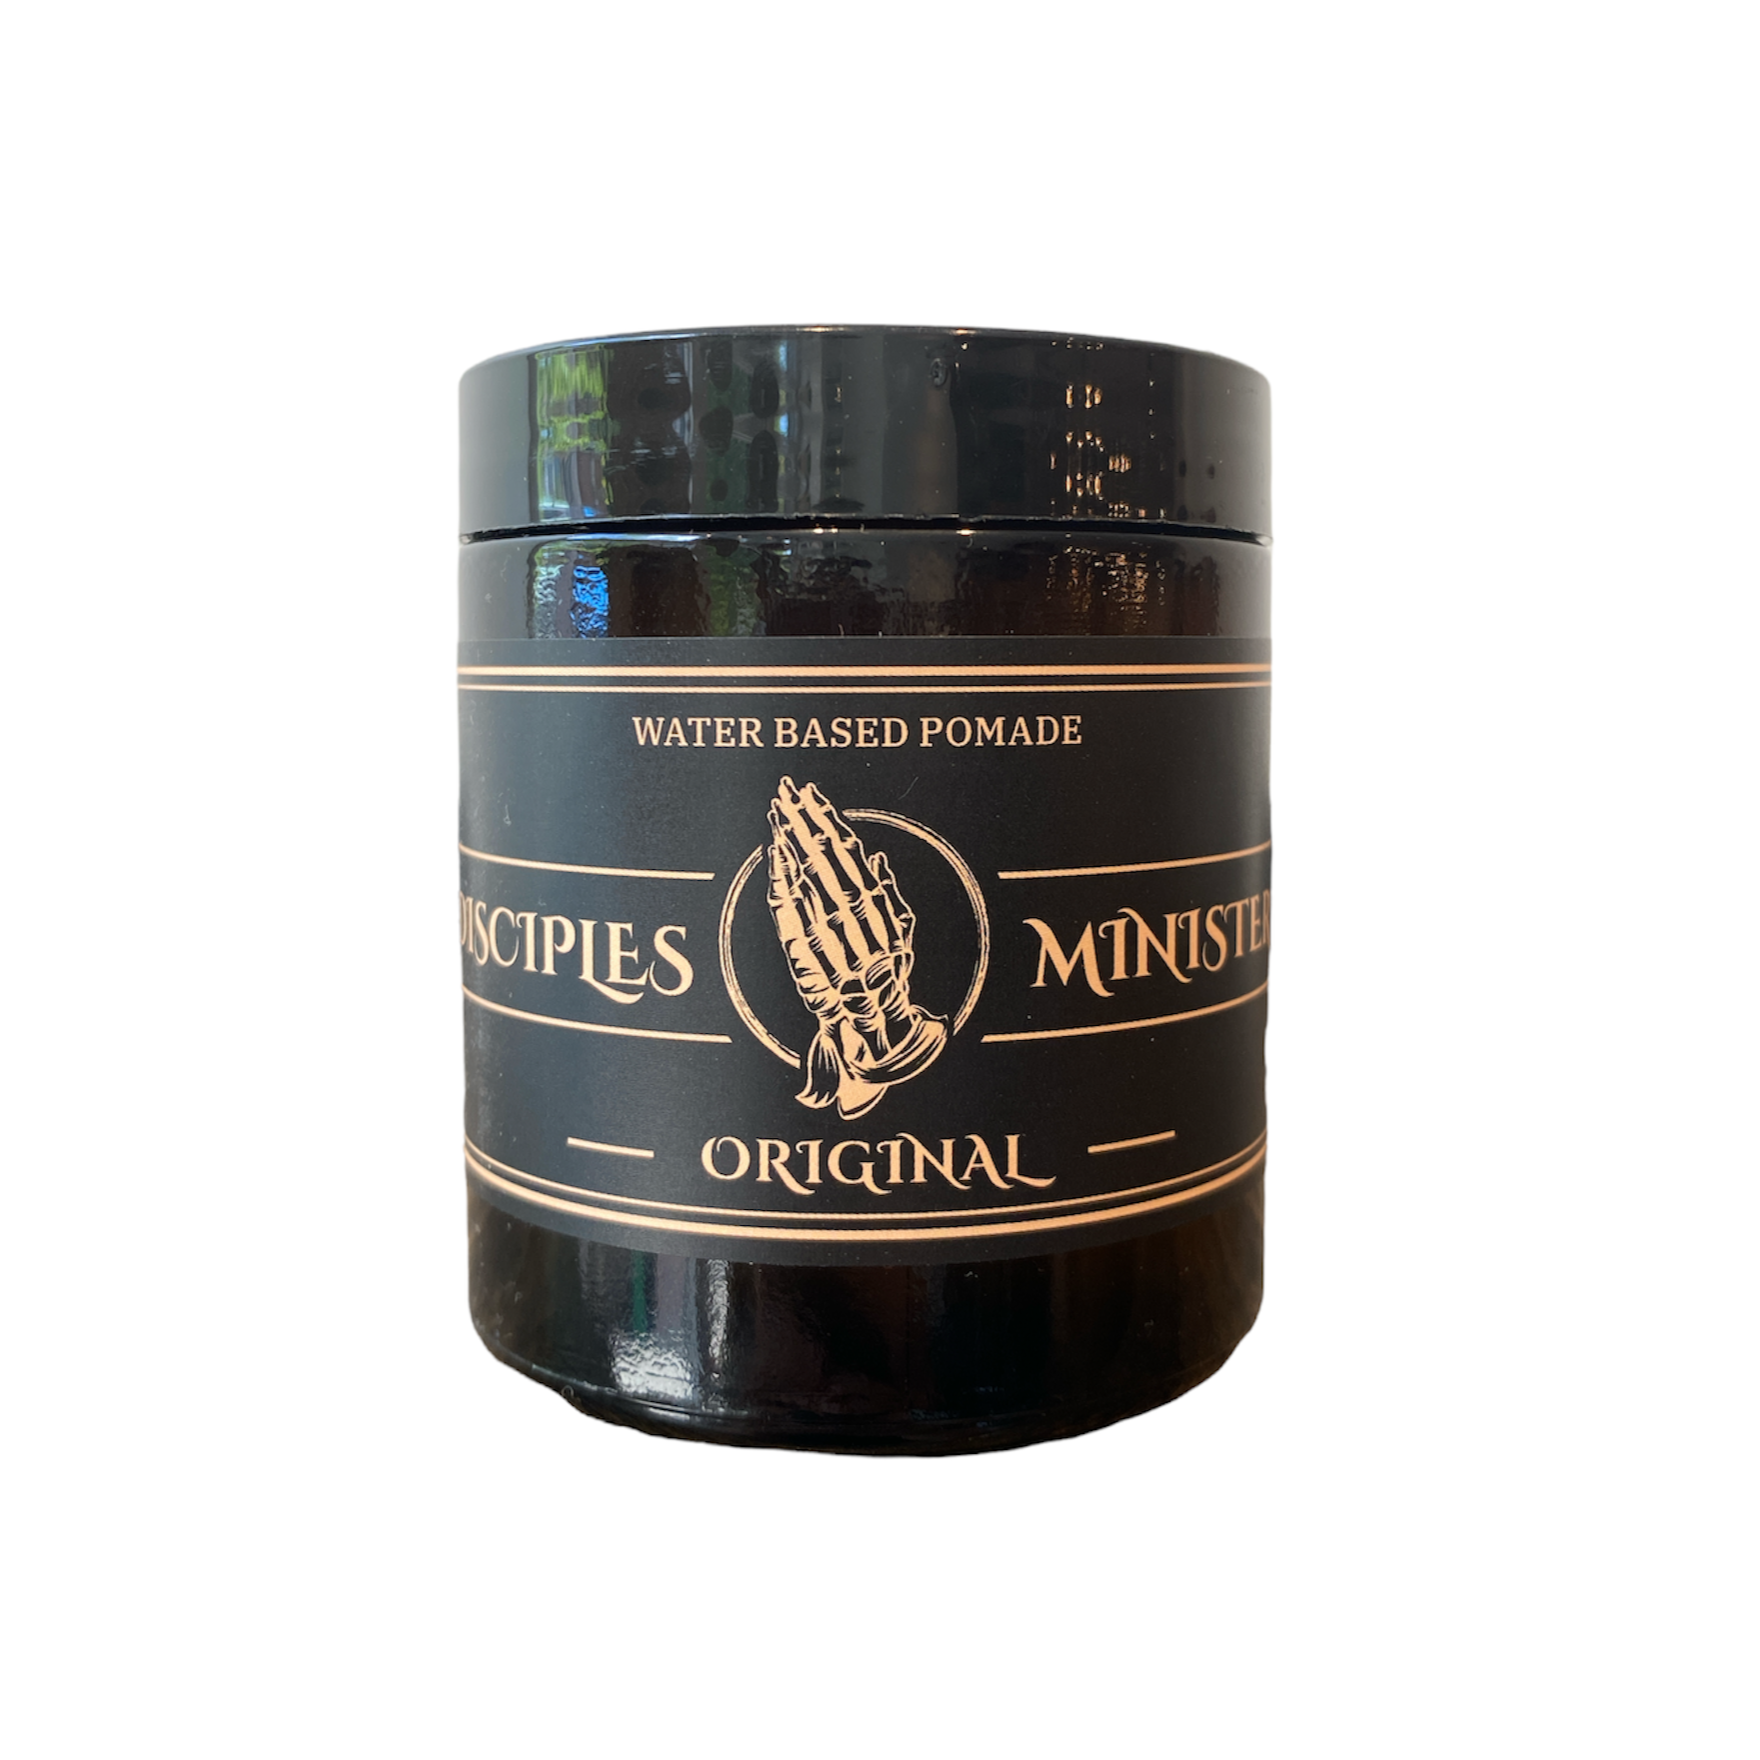 DISCIPLES & MINISTERS - WATER BASED POMADE